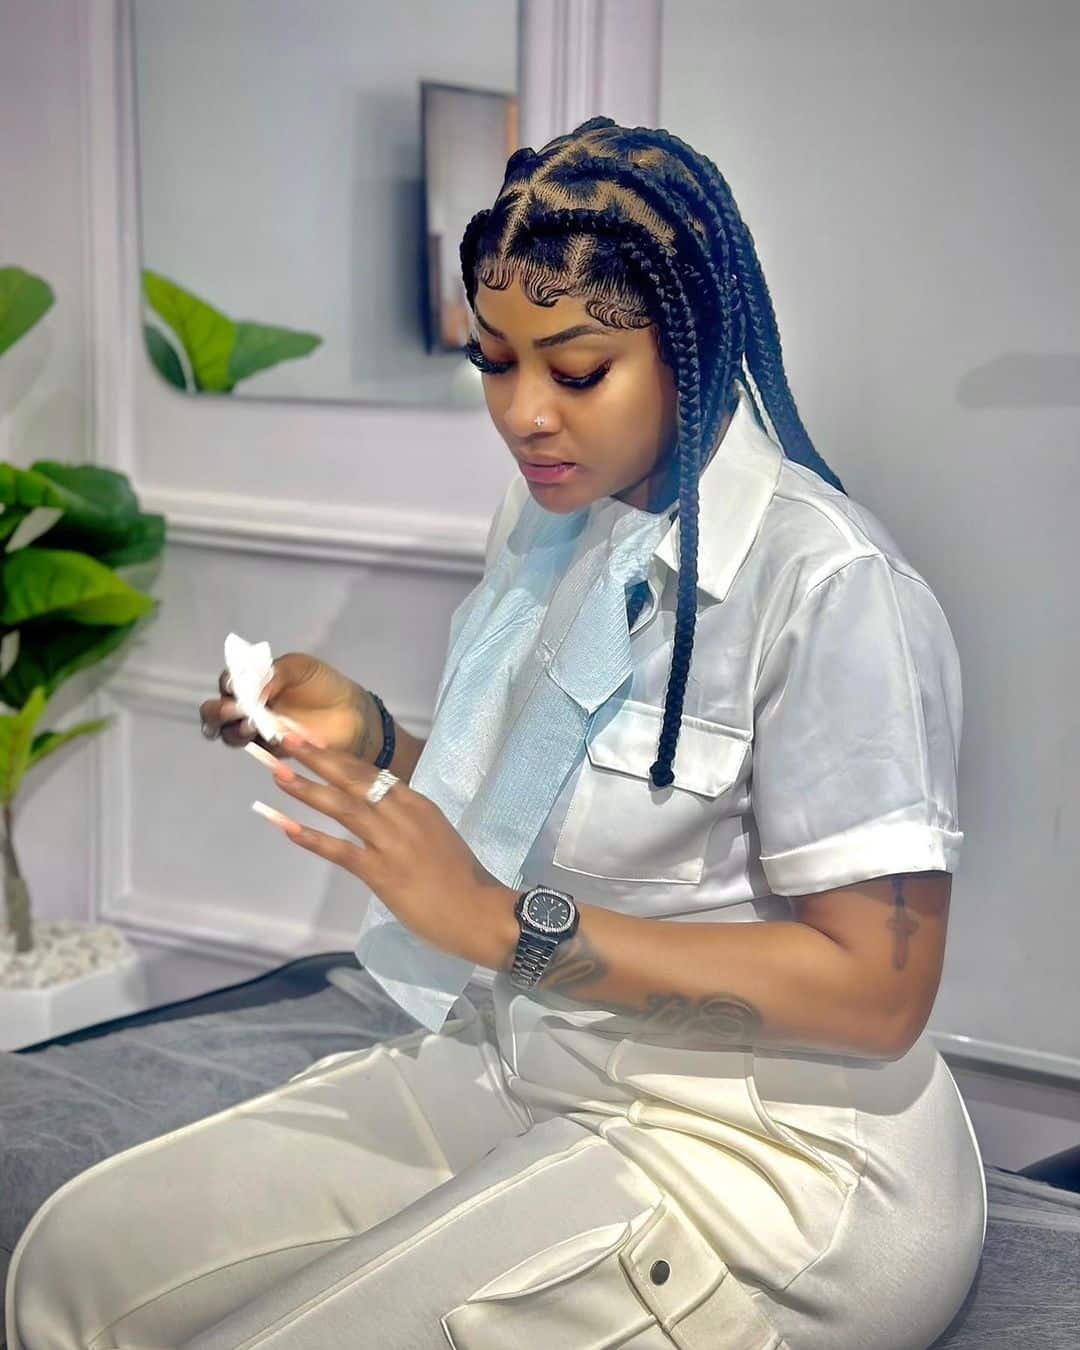 “Don’t cheat on me and come back home with ordinary sorry" - Angela Okorie